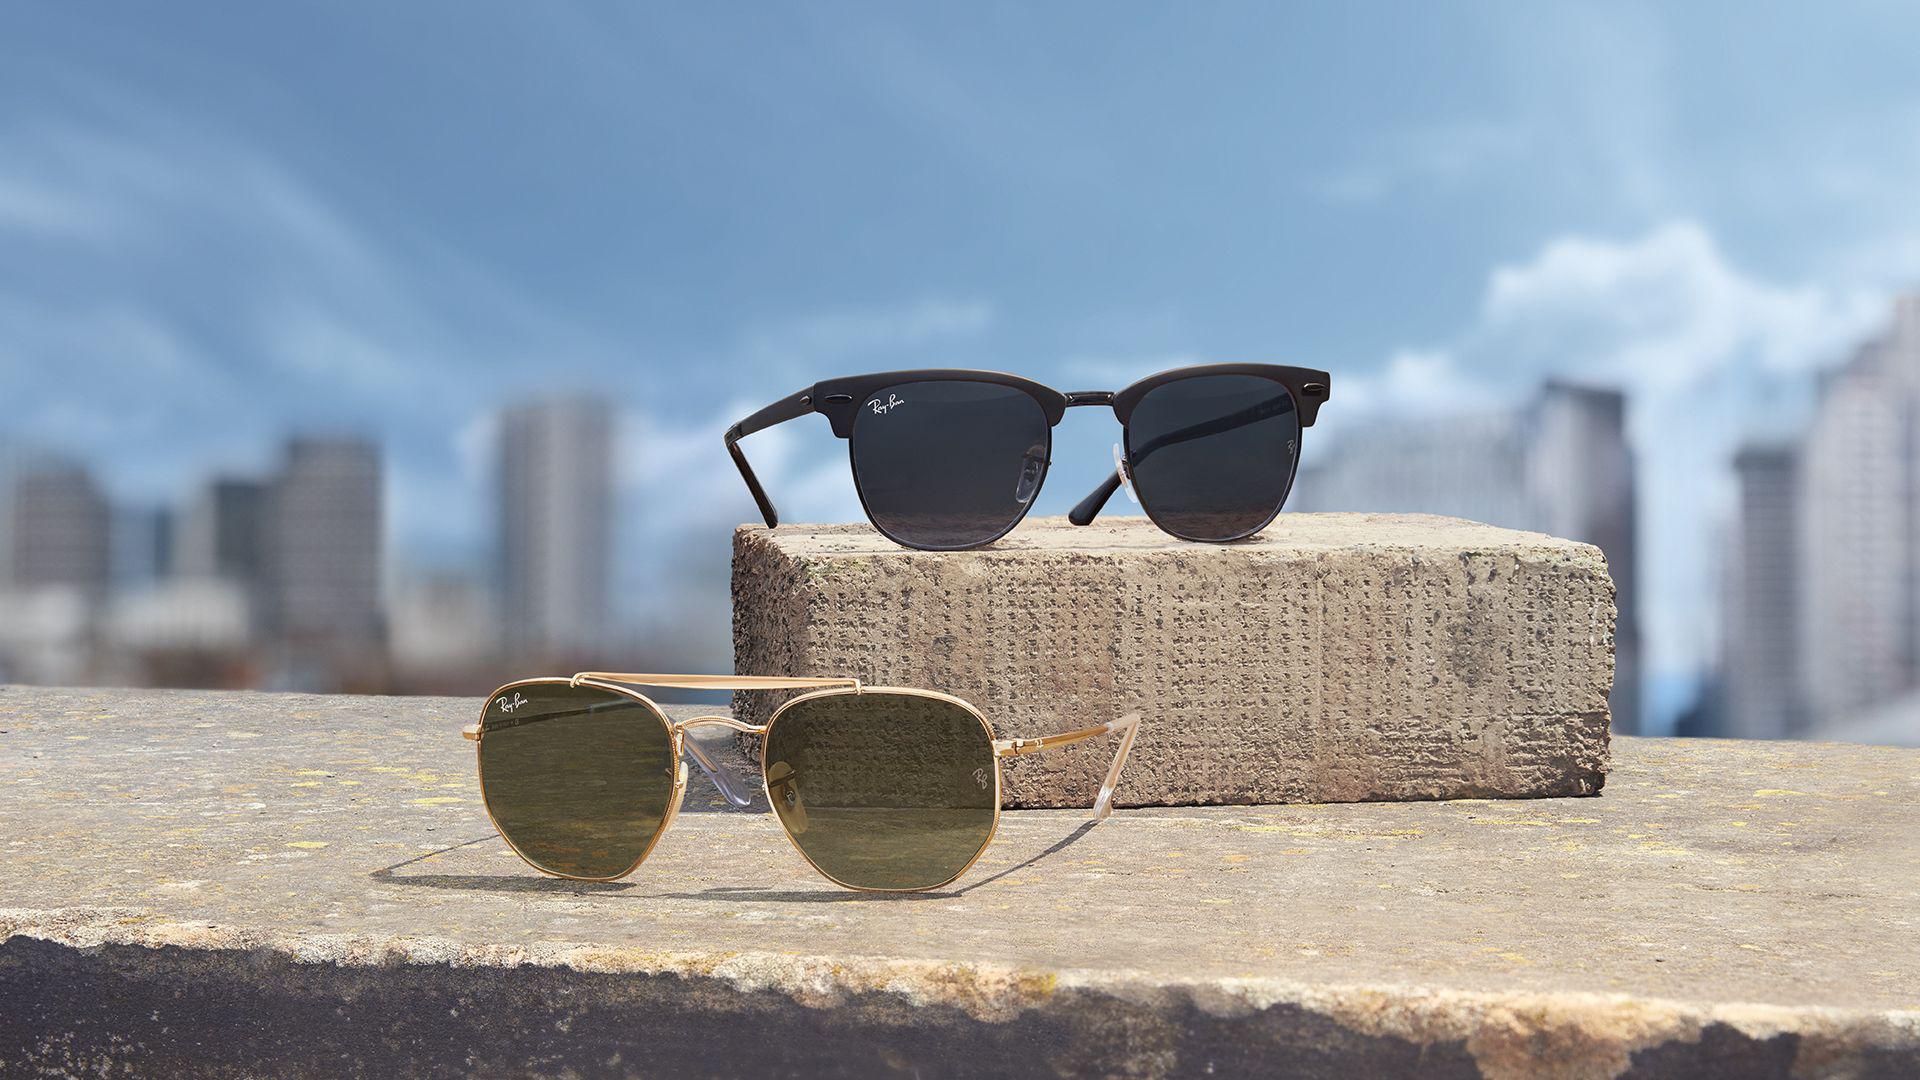 Are You Searching For a Timeless Square Sunglasses: 10 Stylish Ray-Ban Options